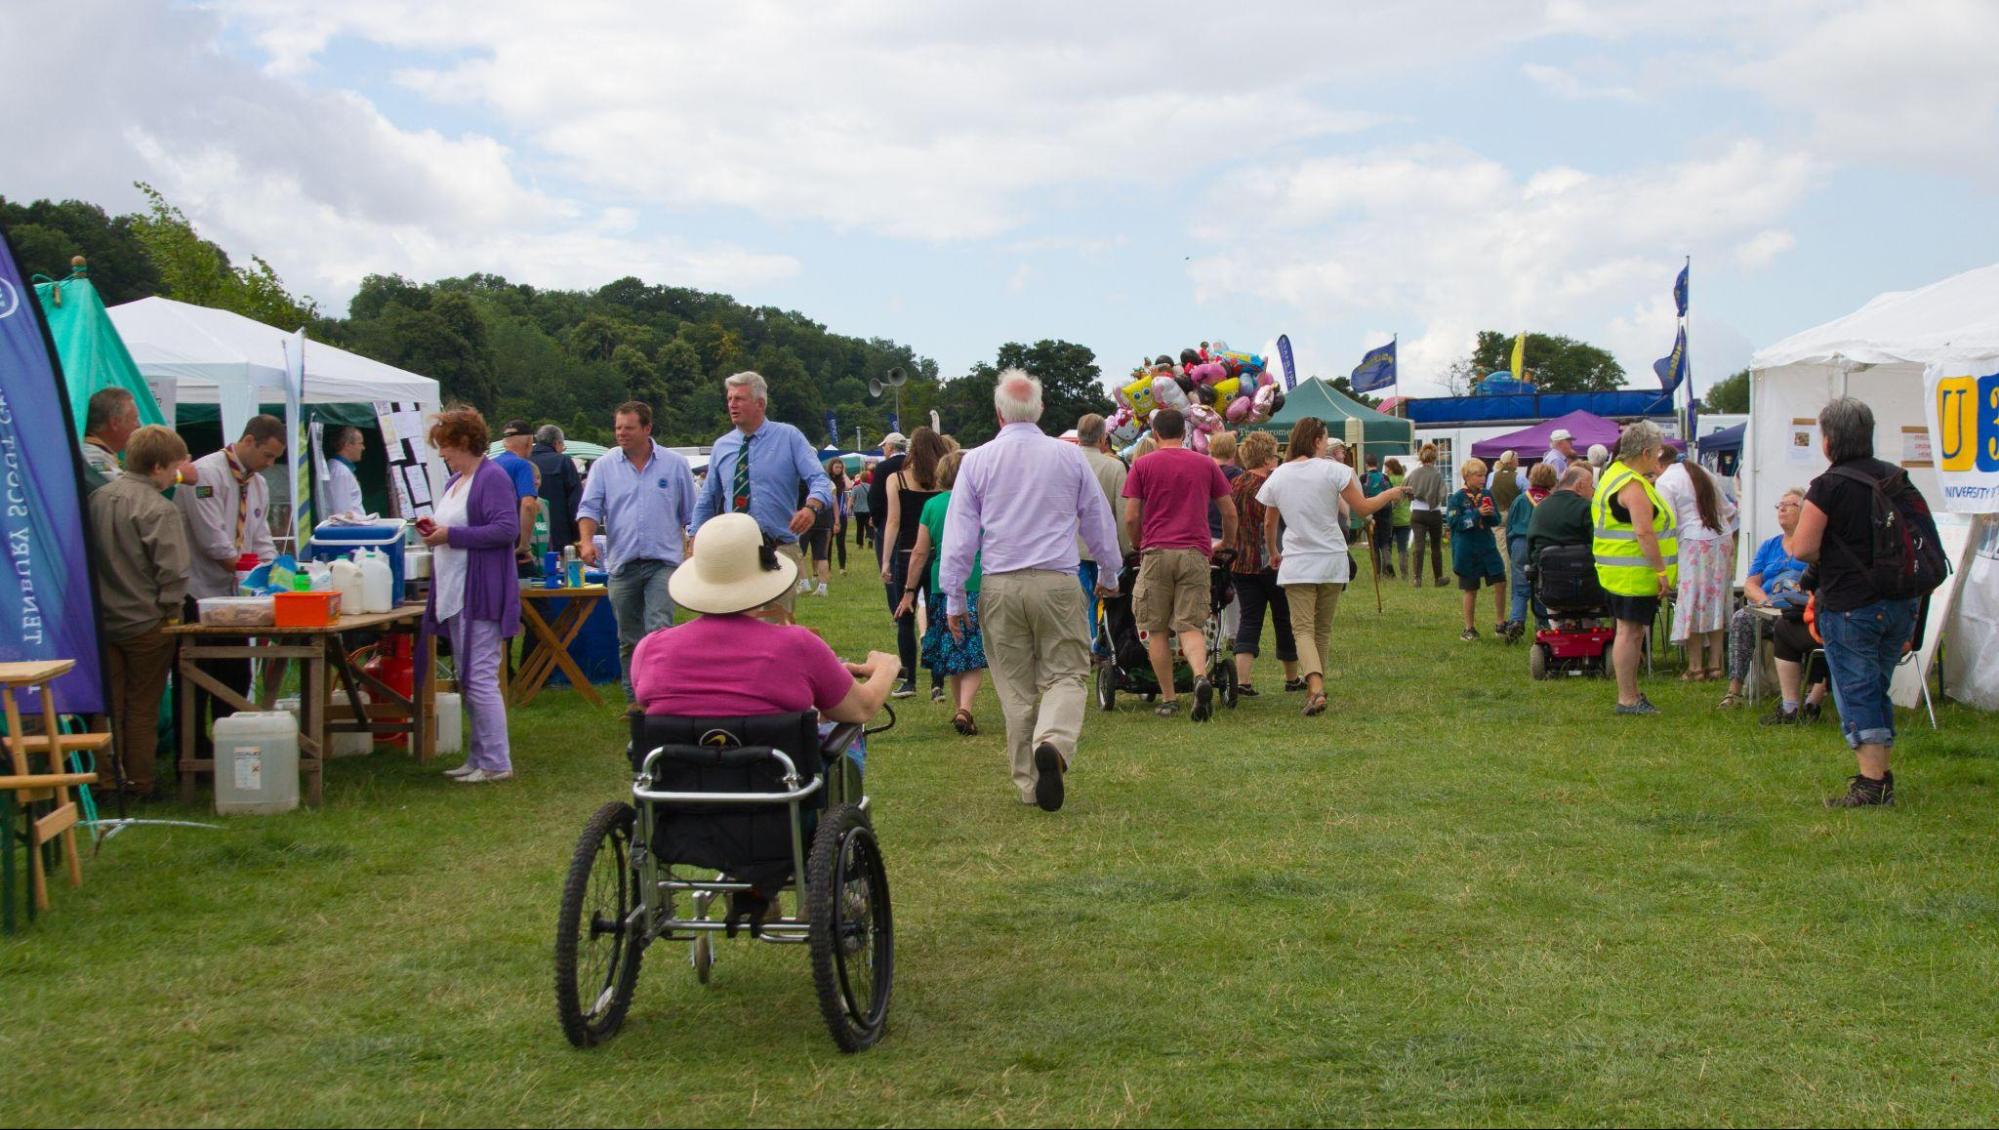 outdoor event space with handicapped person among guests